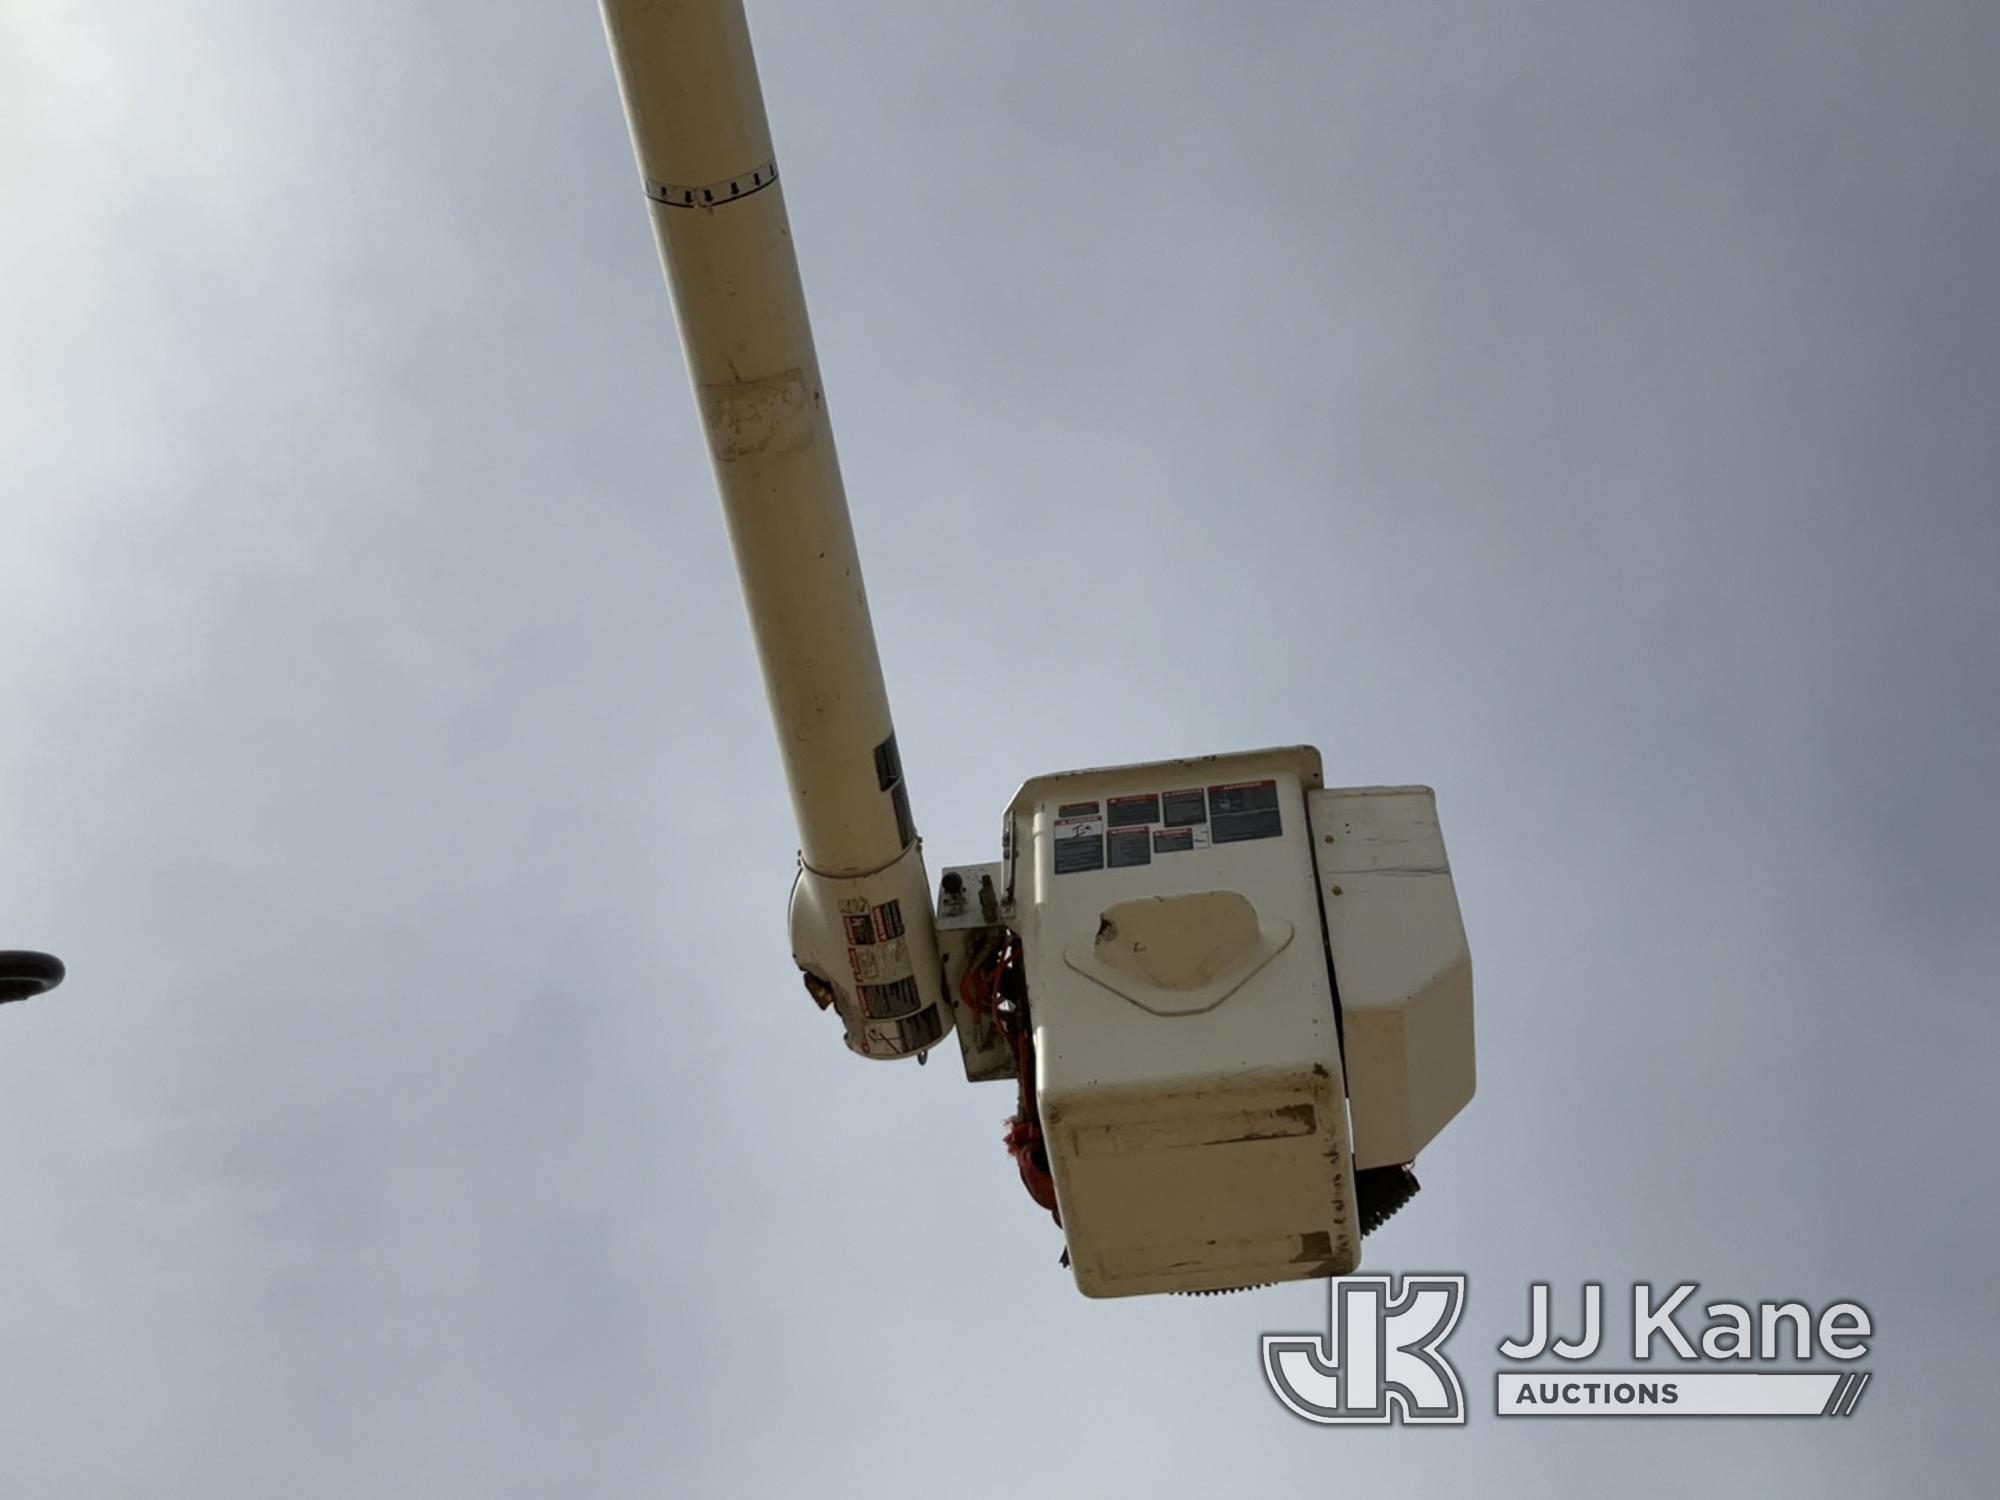 (Des Moines, IA) Altec LB650A, Bucket Truck mounted behind cab on 1994 International 4900 Chipper Du